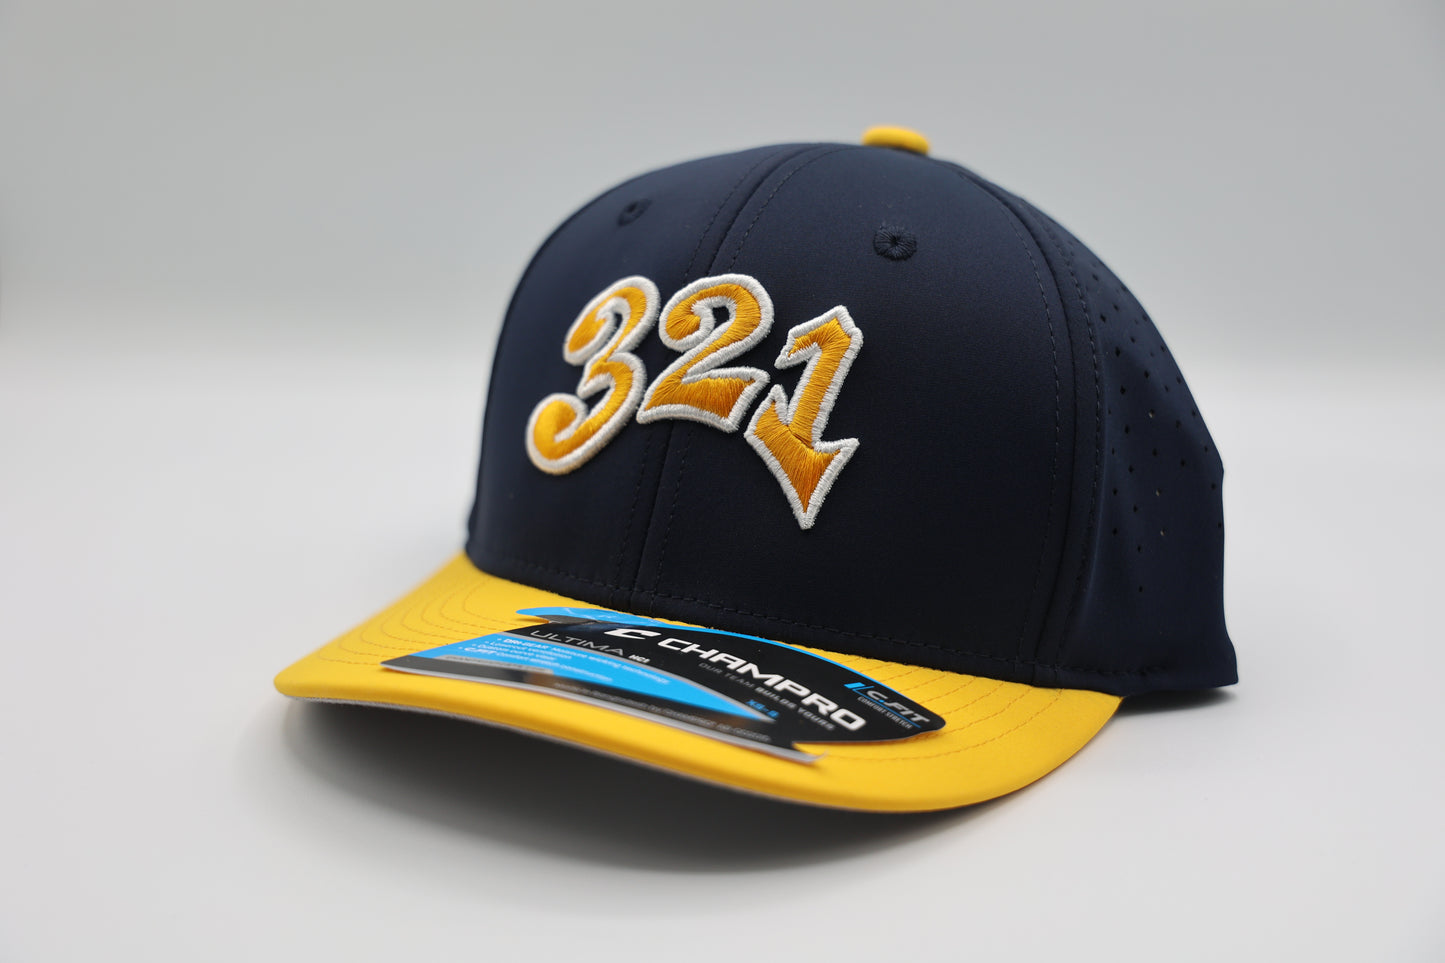 Club 321 Baseball OFFICIAL GAME Ventilated Stretch Fit Hat